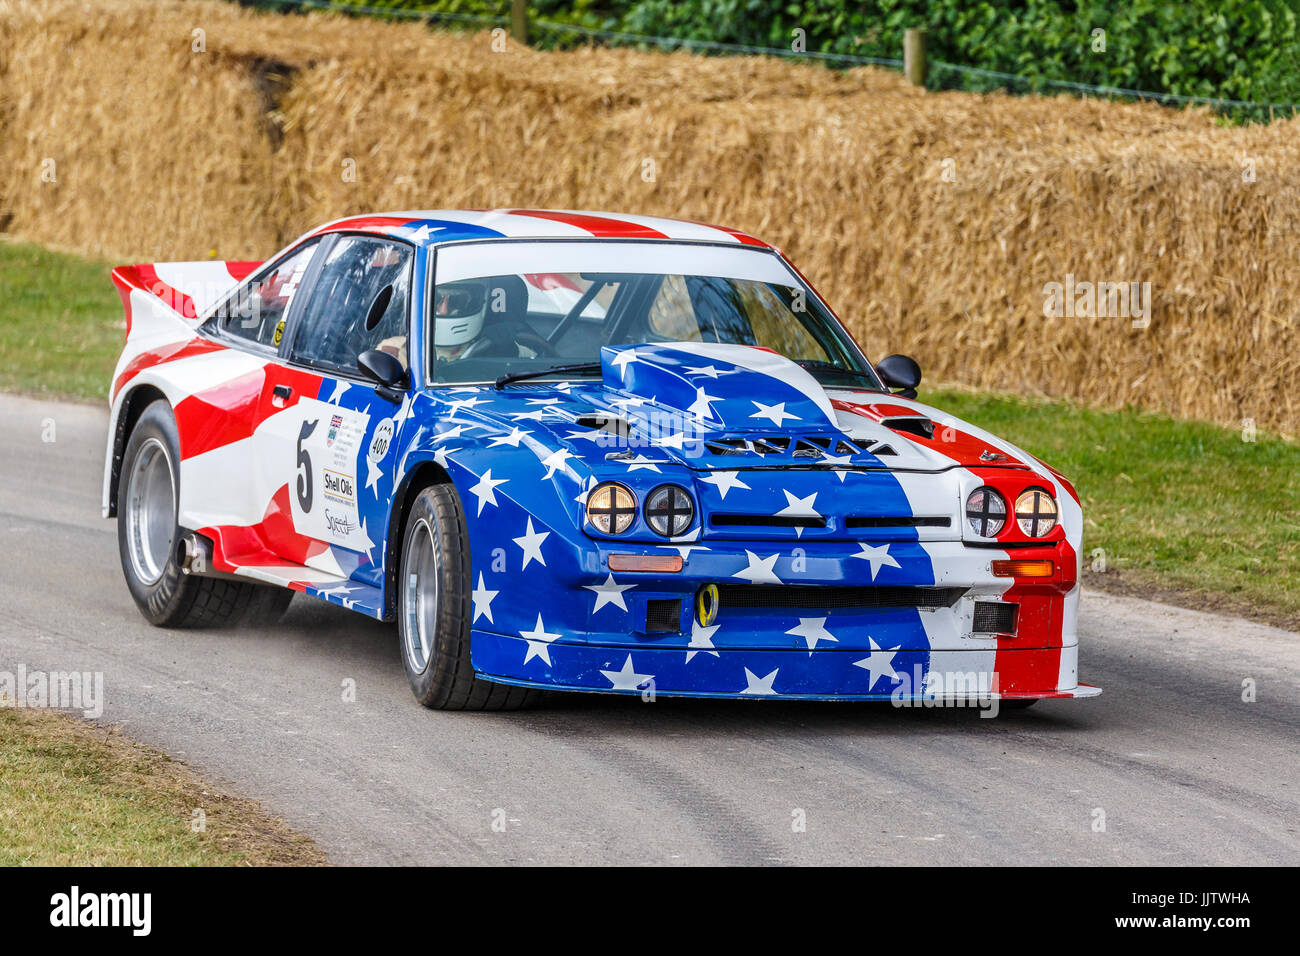 1986 Opel Manta 400 'Stars and Stripes' Thundersaloons racer avec Chauffeur Jack à la Tetley 2017 Goodwood Festival of Speed, Sussex, UK. Banque D'Images